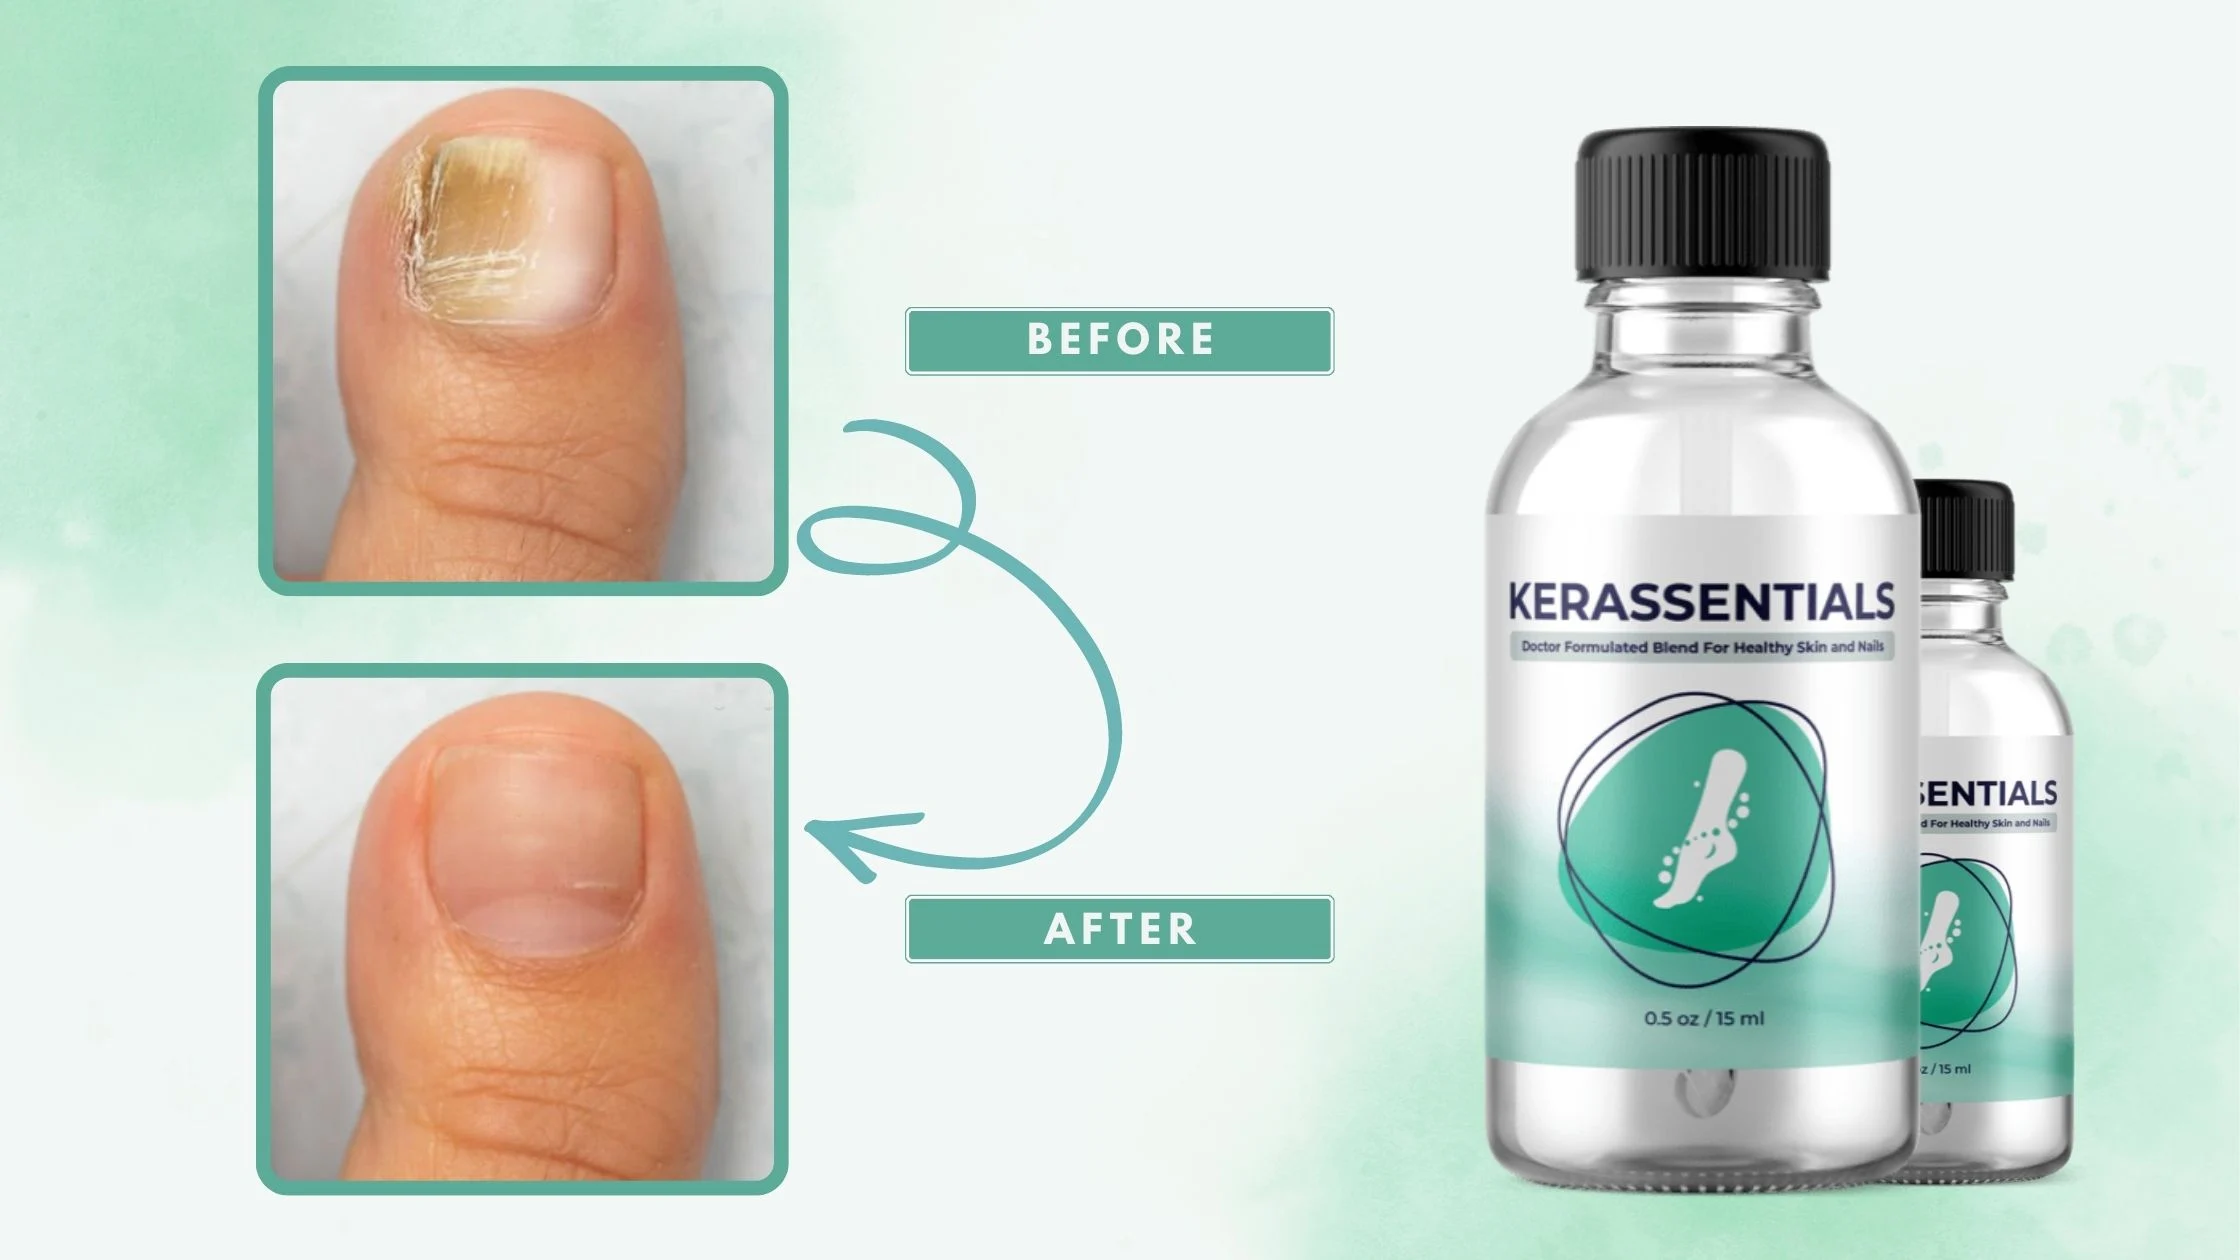 Kerassentials before and after